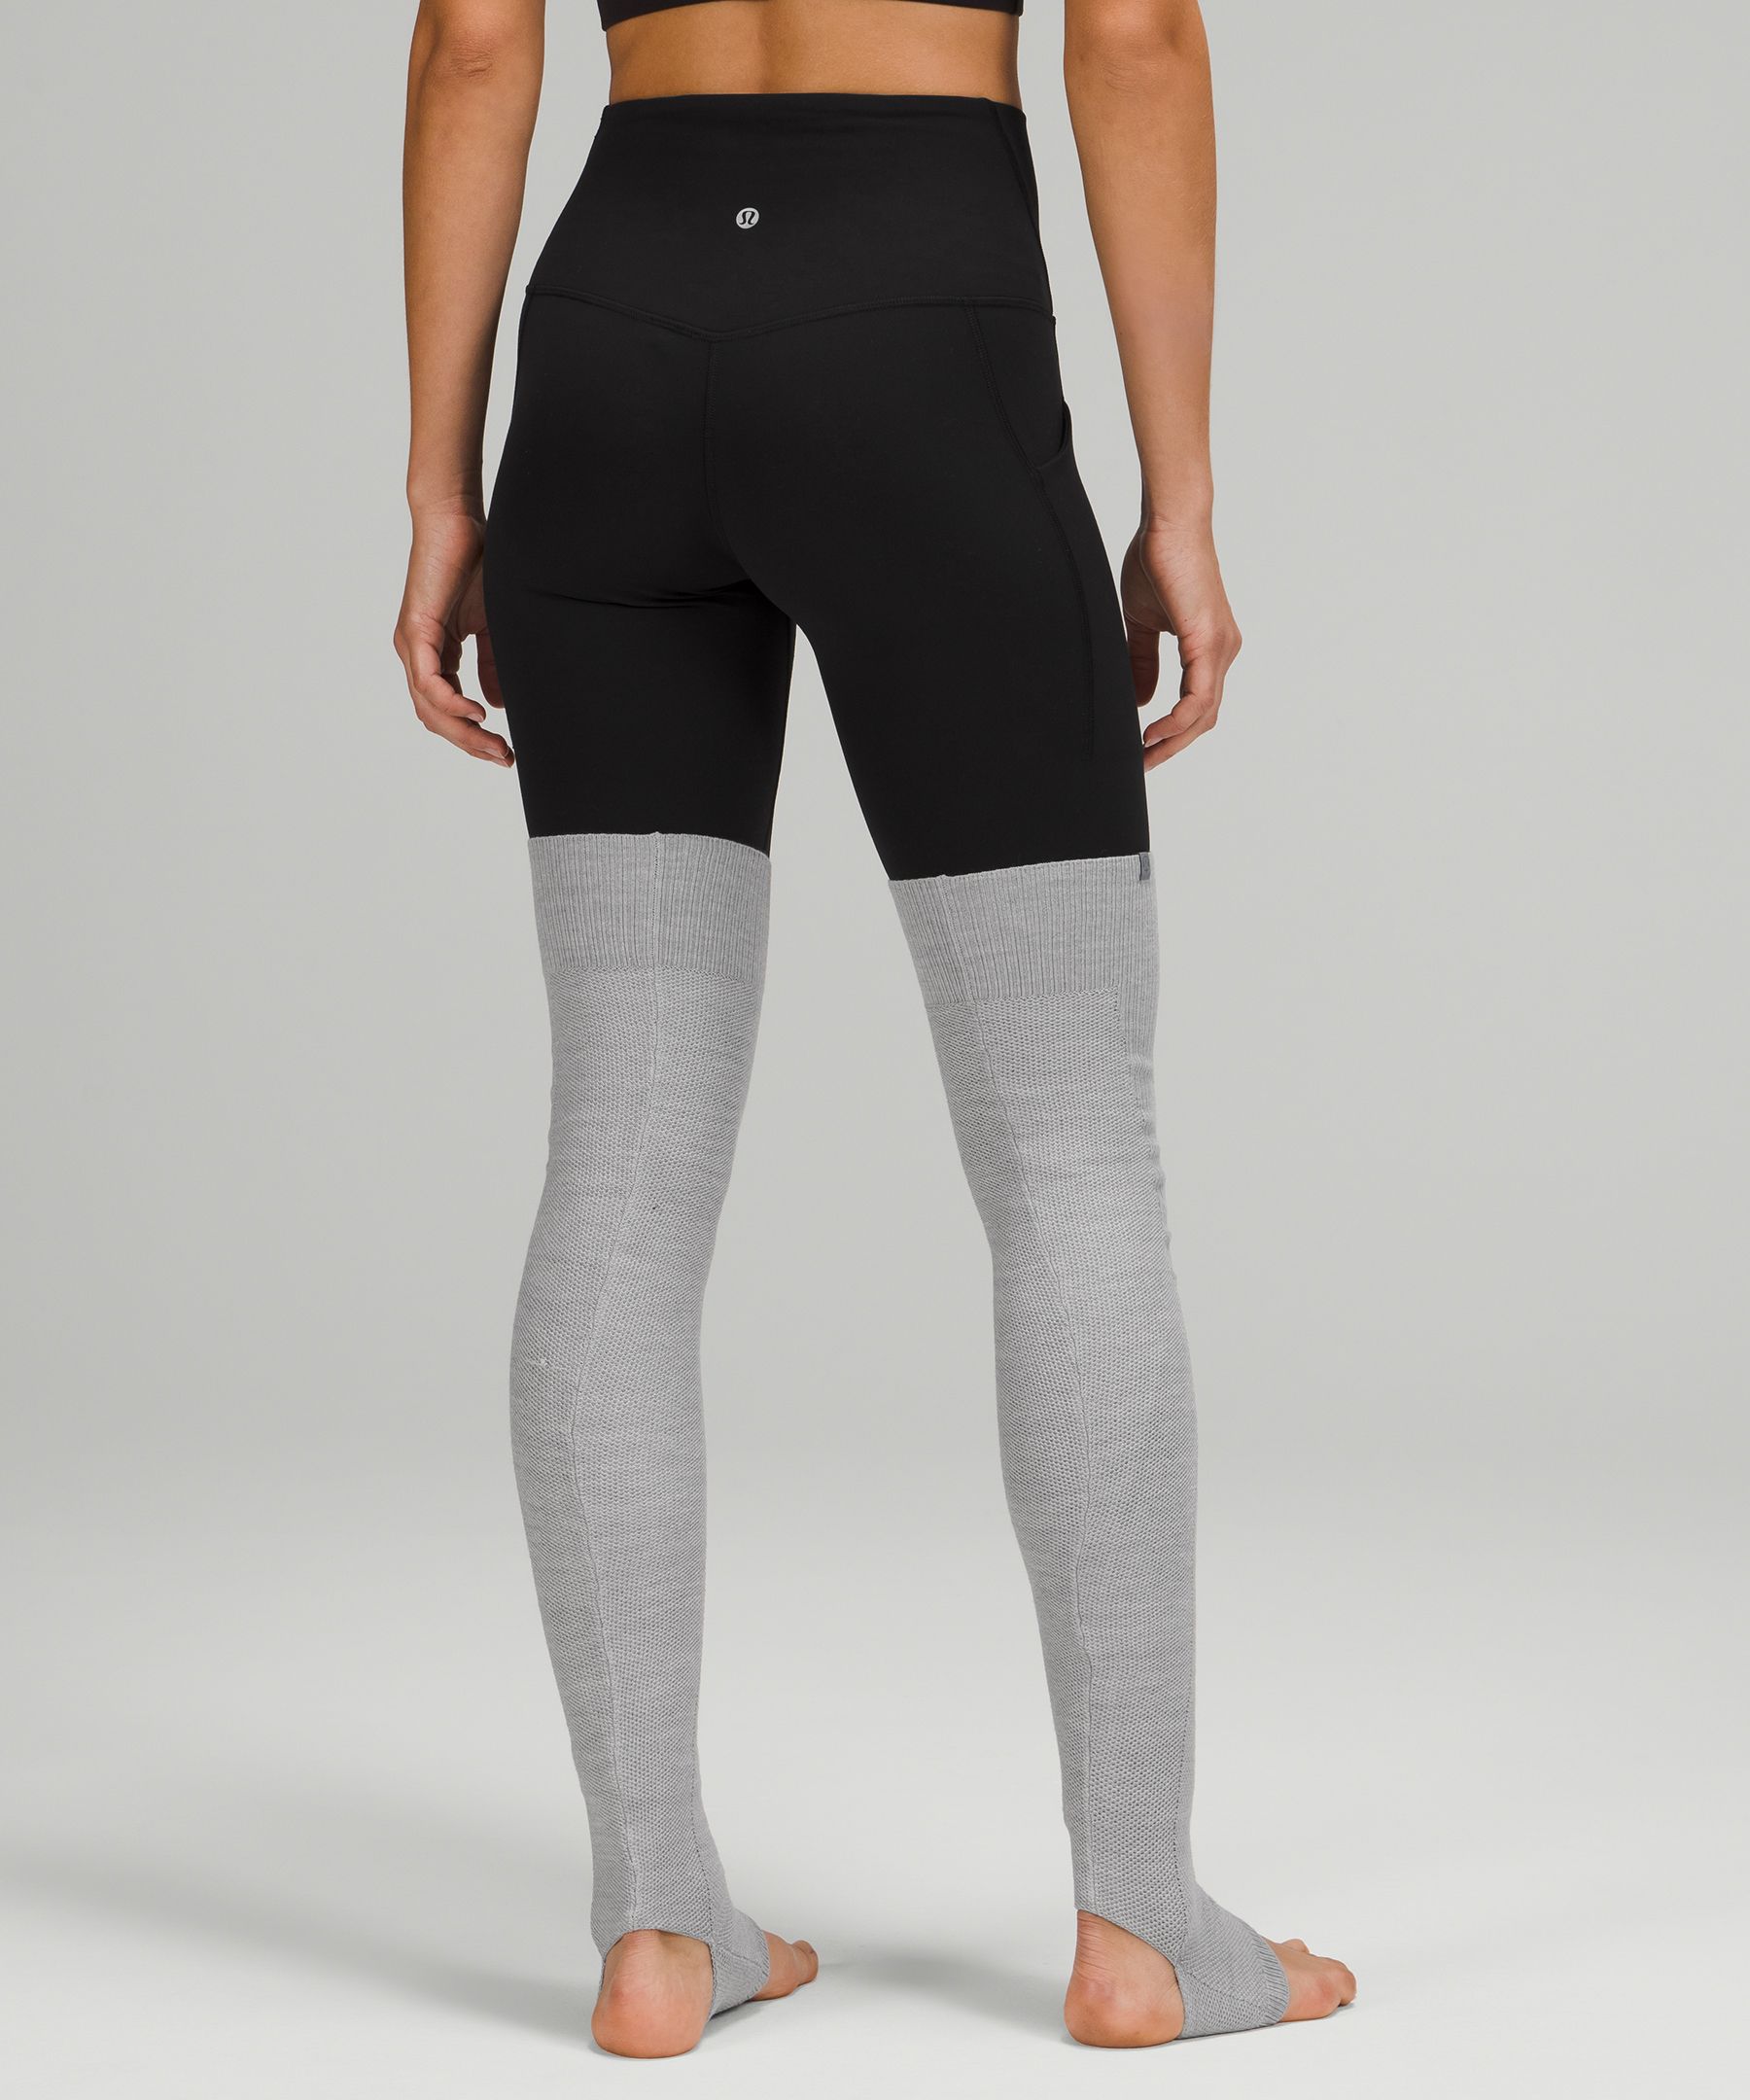 Leg Warmers to Lululemon: How Workout Outfits Have Changed Over the Years